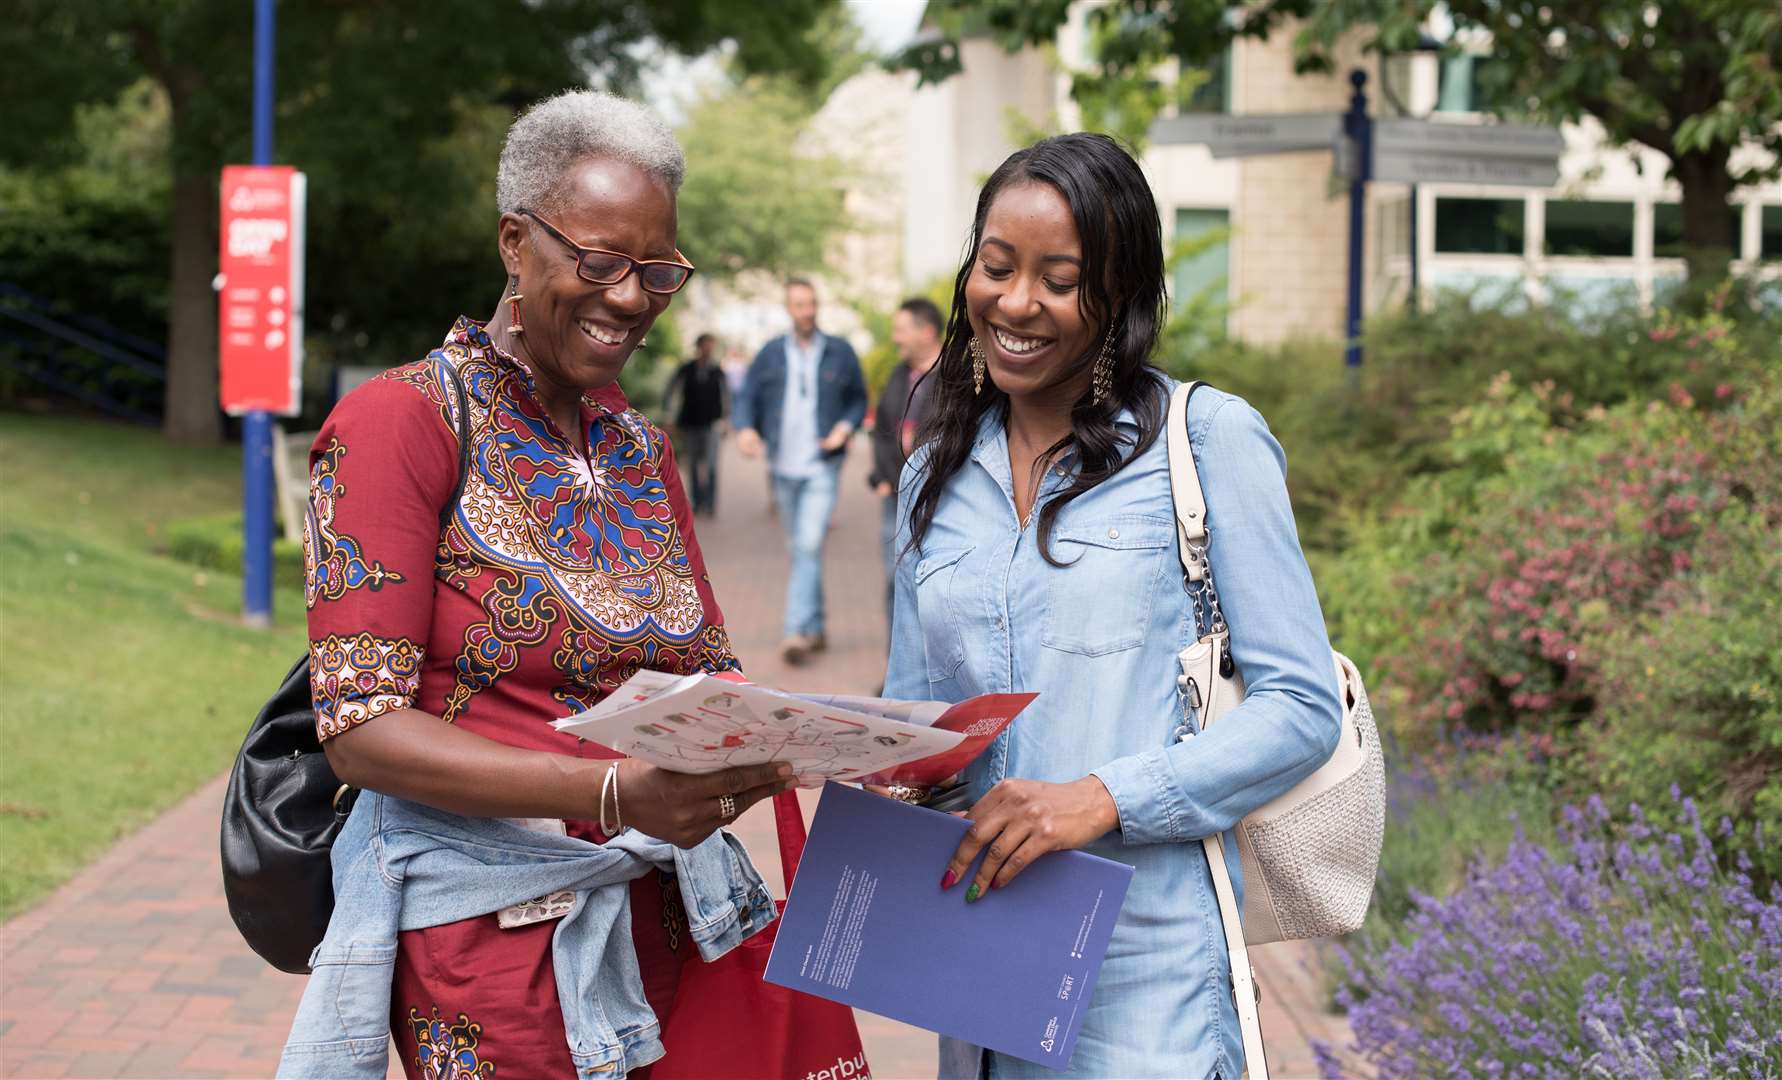 Every year Canterbury Christ Church University welcomes thousands of prospective students accompanied by family and friends to events at its Canterbury and Medway Campuses